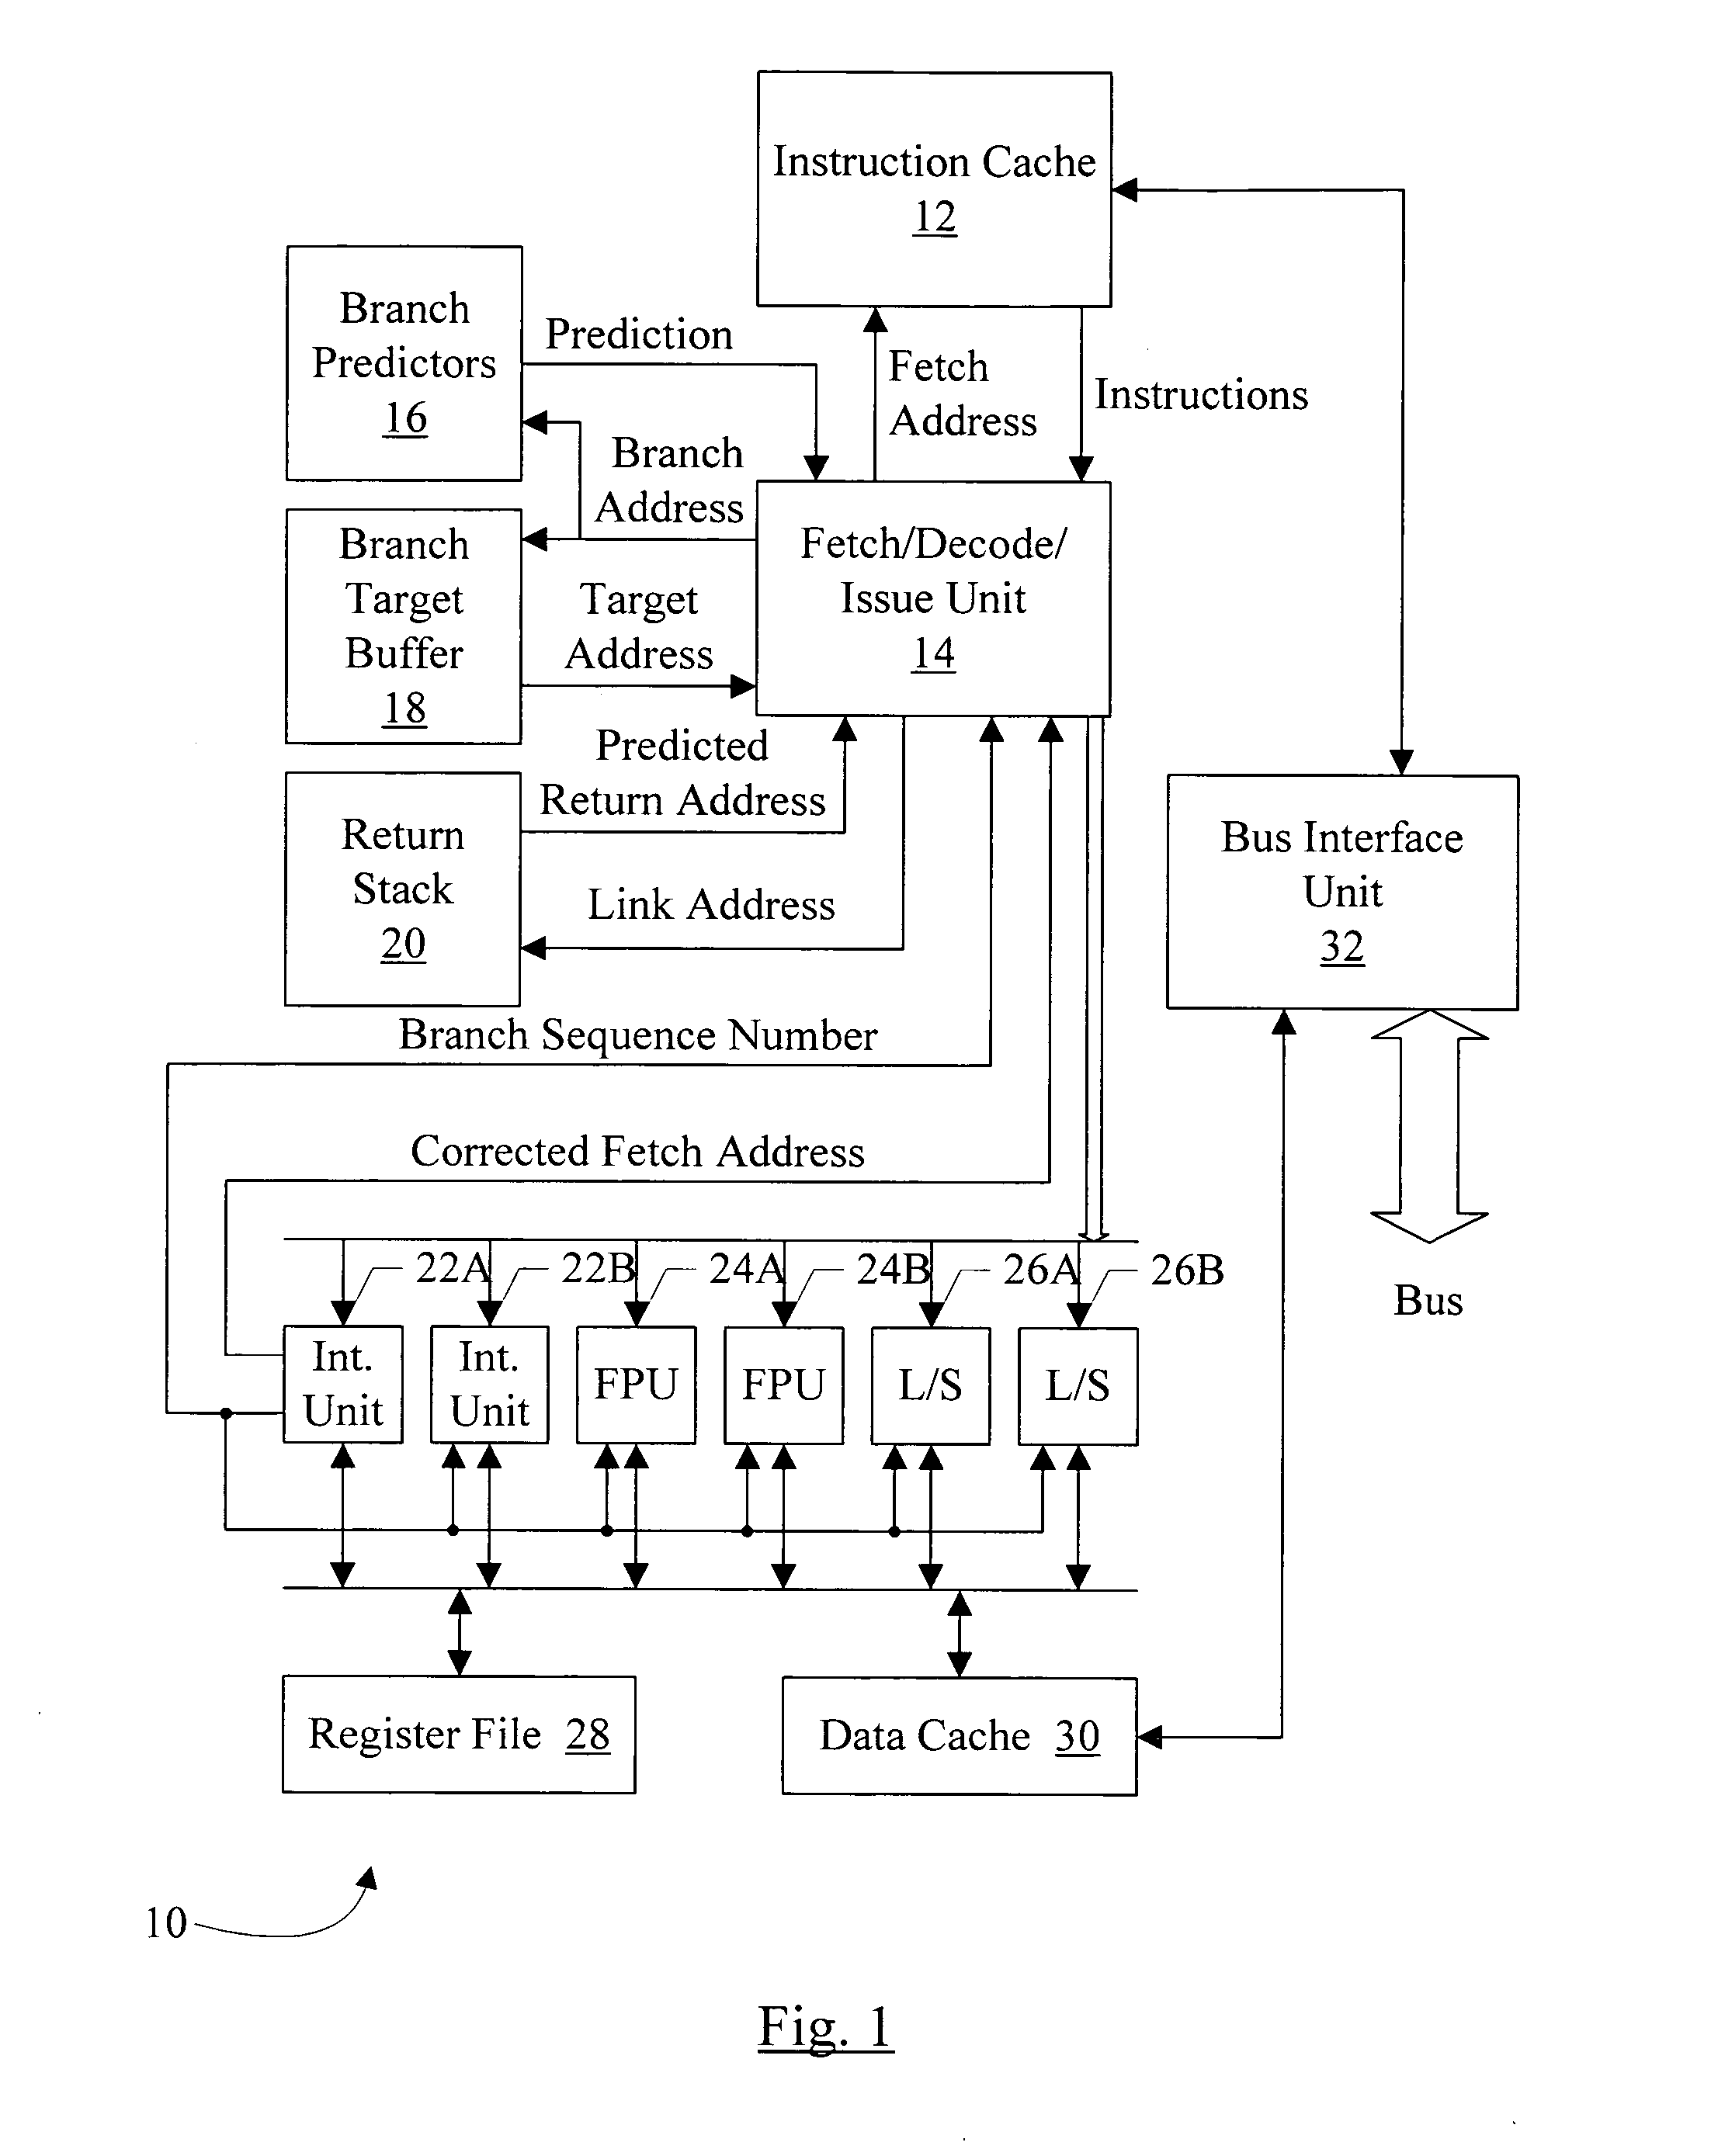 Method for identifying basic blocks with conditional delay slot instructions